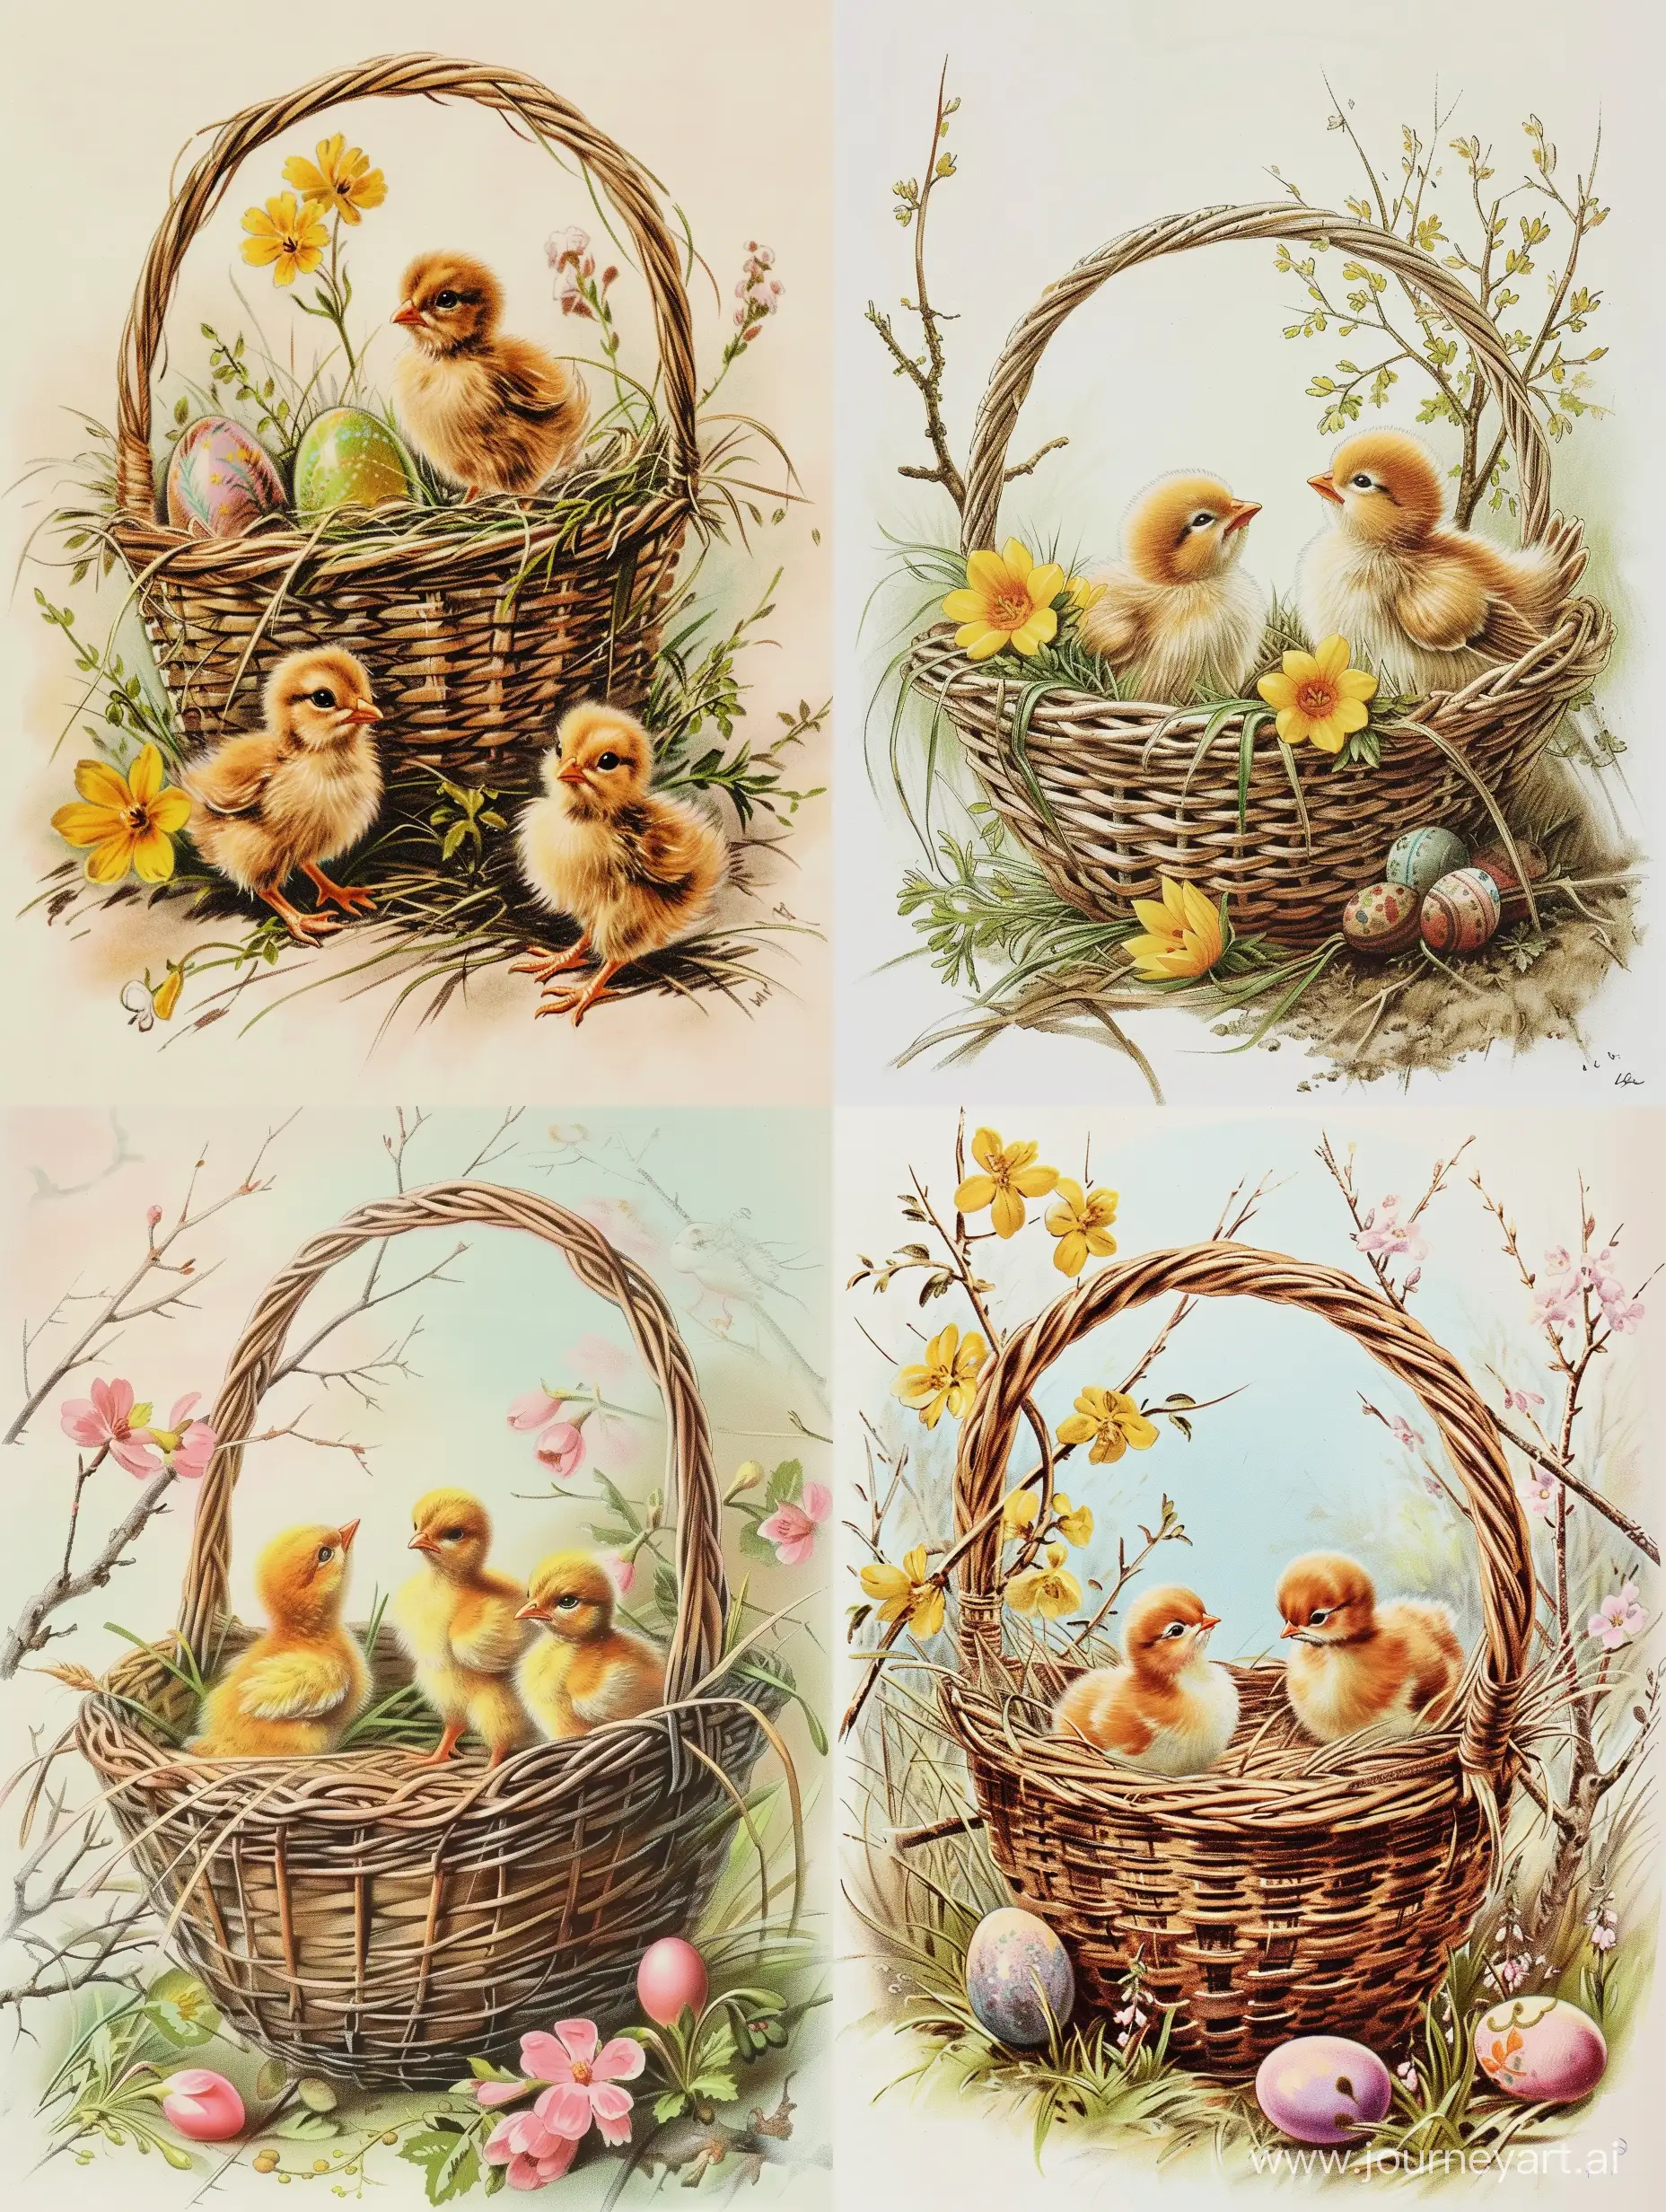 Charming-Easter-Card-with-19th-Century-Russian-Art-Style-Basket-and-Chicks